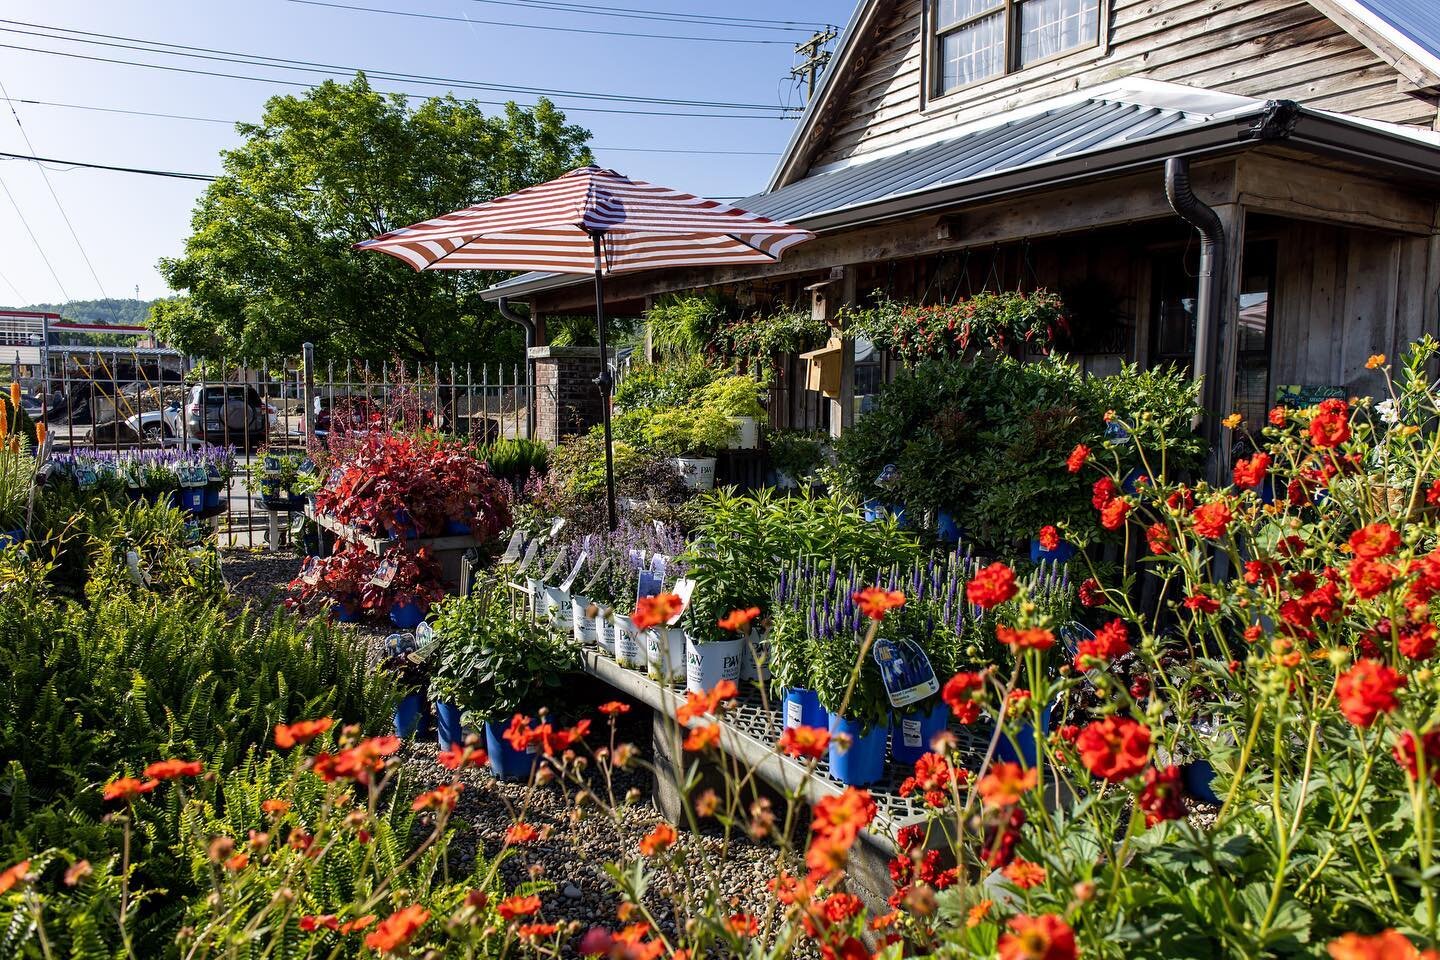 It&rsquo;s planting season! At @thressnursery you will find a large selection of annuals, perennials, tropicals, veggies &amp; herbs, trees &amp; shrubs, and indoor plants. 

Come spend a morning browsing, and don&rsquo;t forget to visit our gift-sho